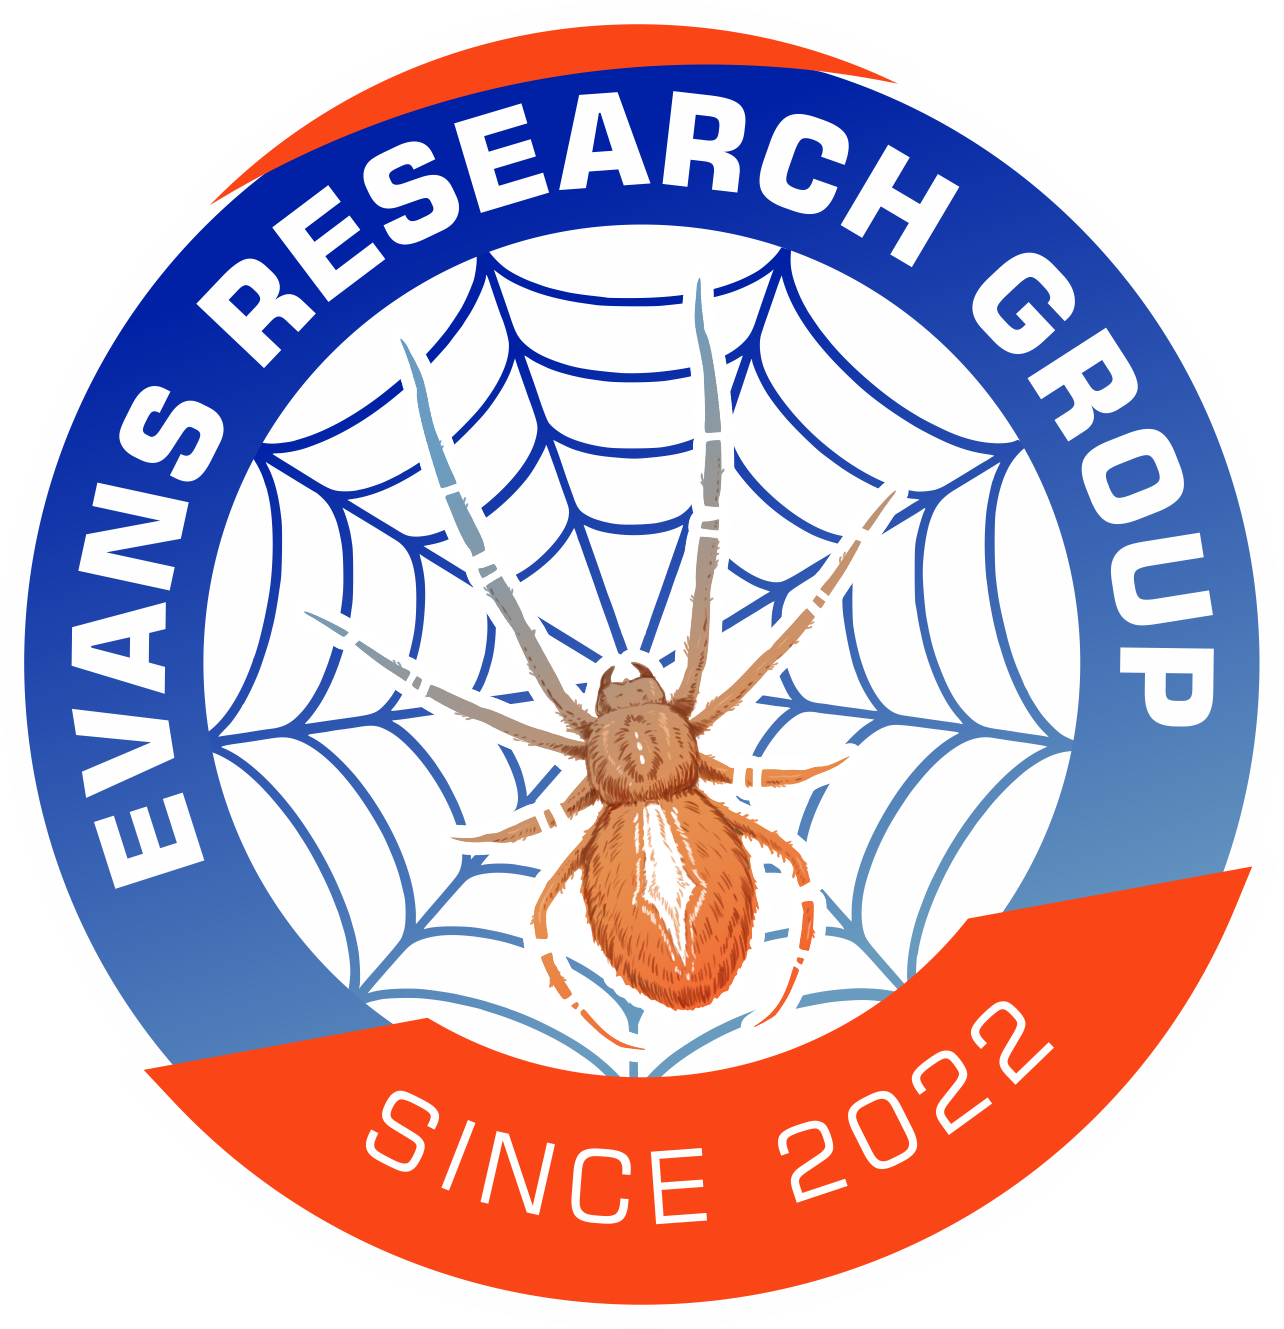 Evans Research Group